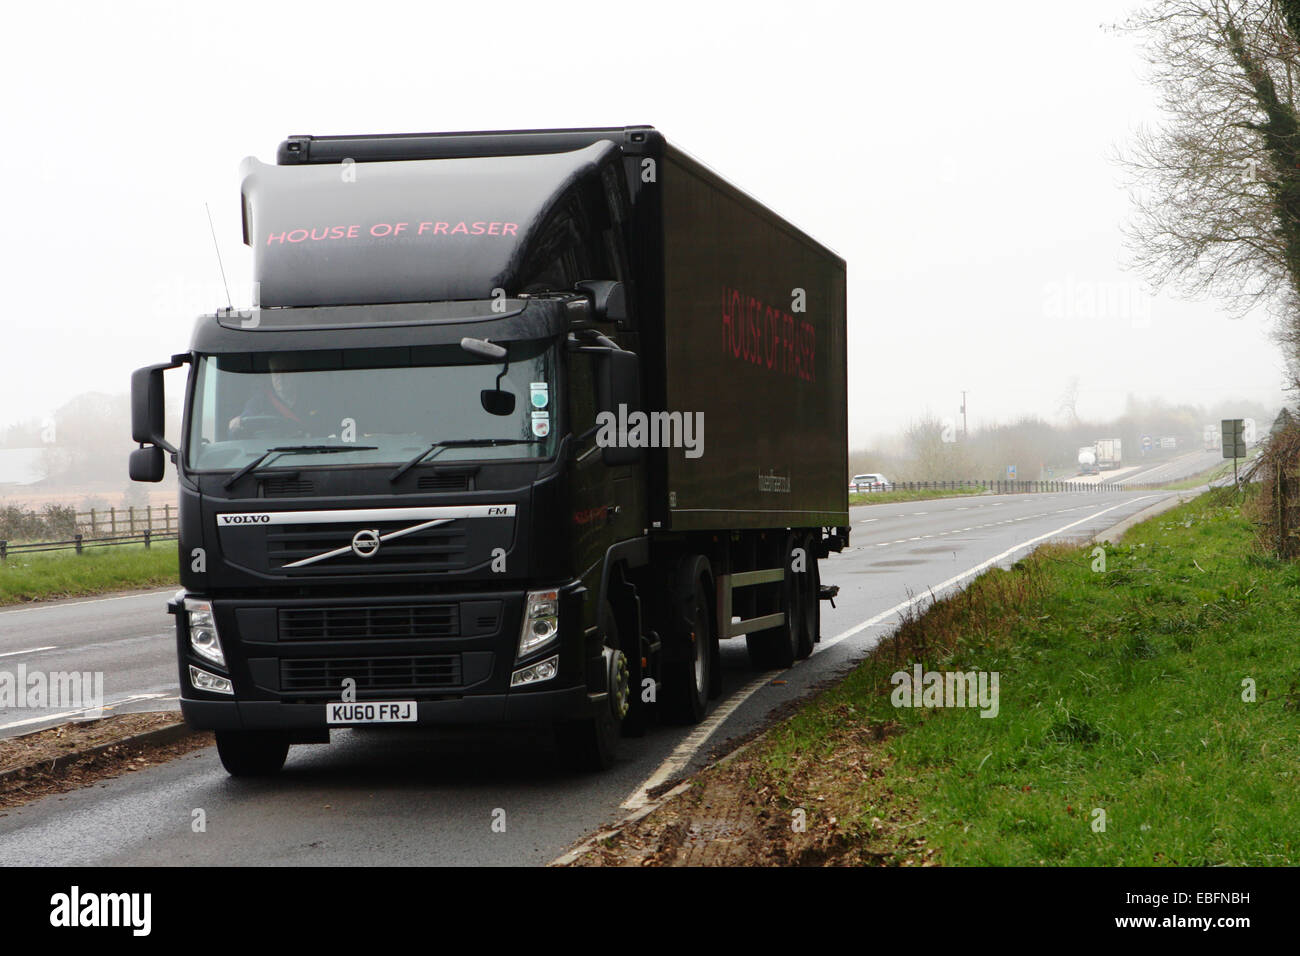 A House of Fraser truck driving into a lay-by on the A417 dual carriageway in the Cotswolds, England Stock Photo